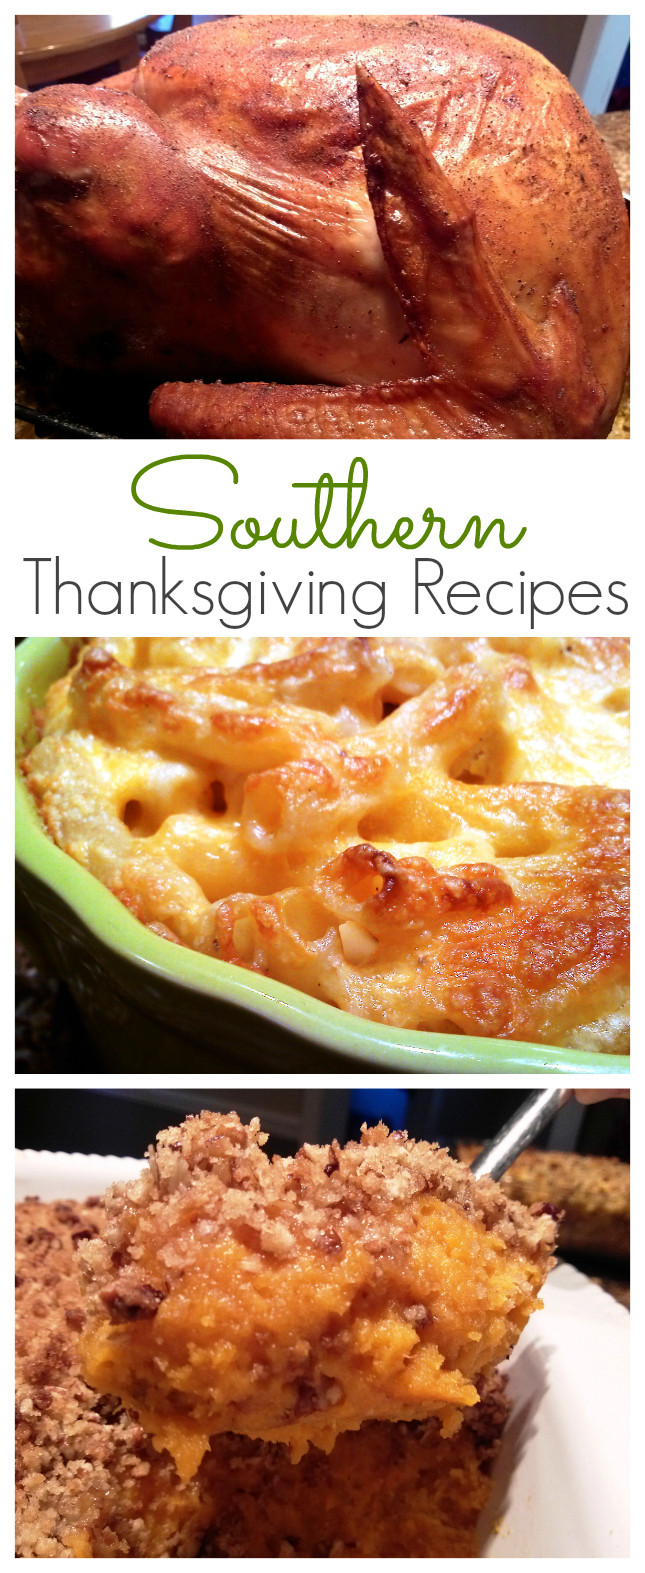 Southern Thanksgiving Desserts
 South Your Mouth Southern Thanksgiving Recipes